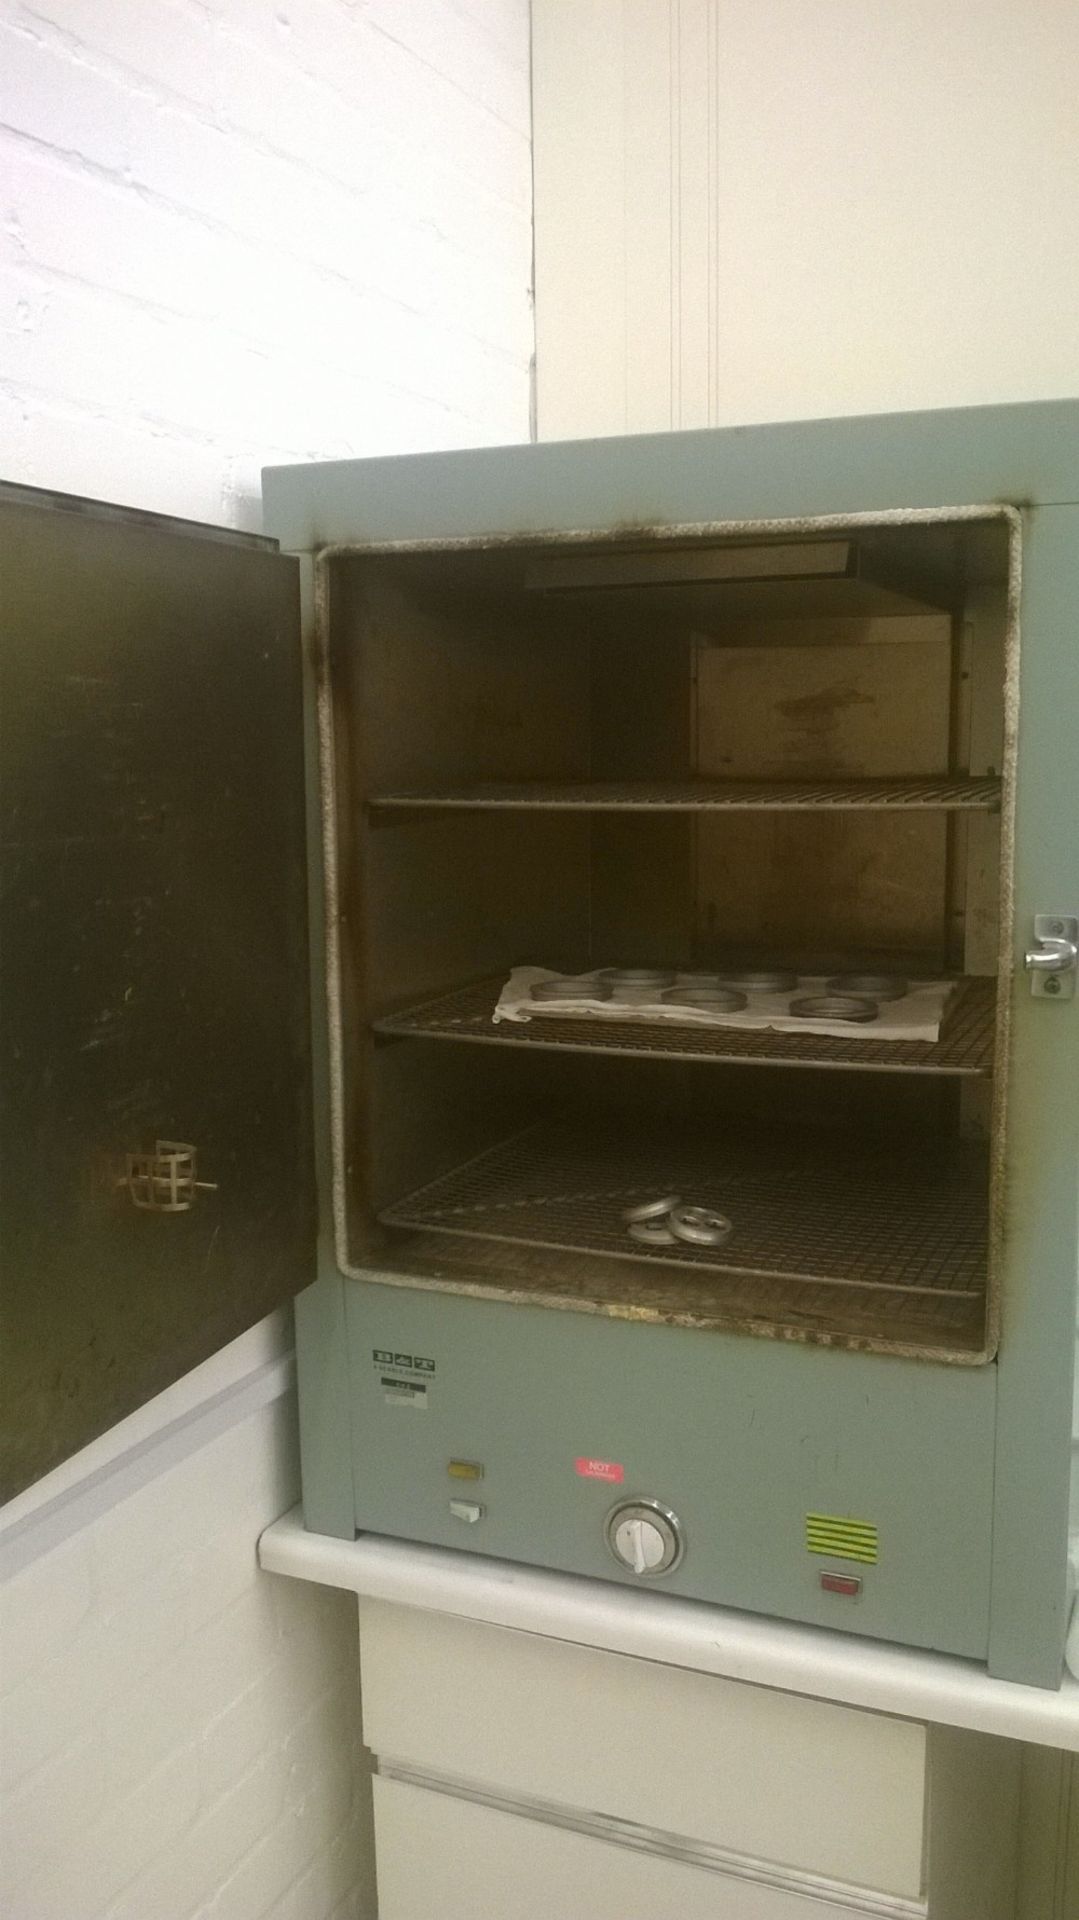 B&T lab oven - Image 6 of 8